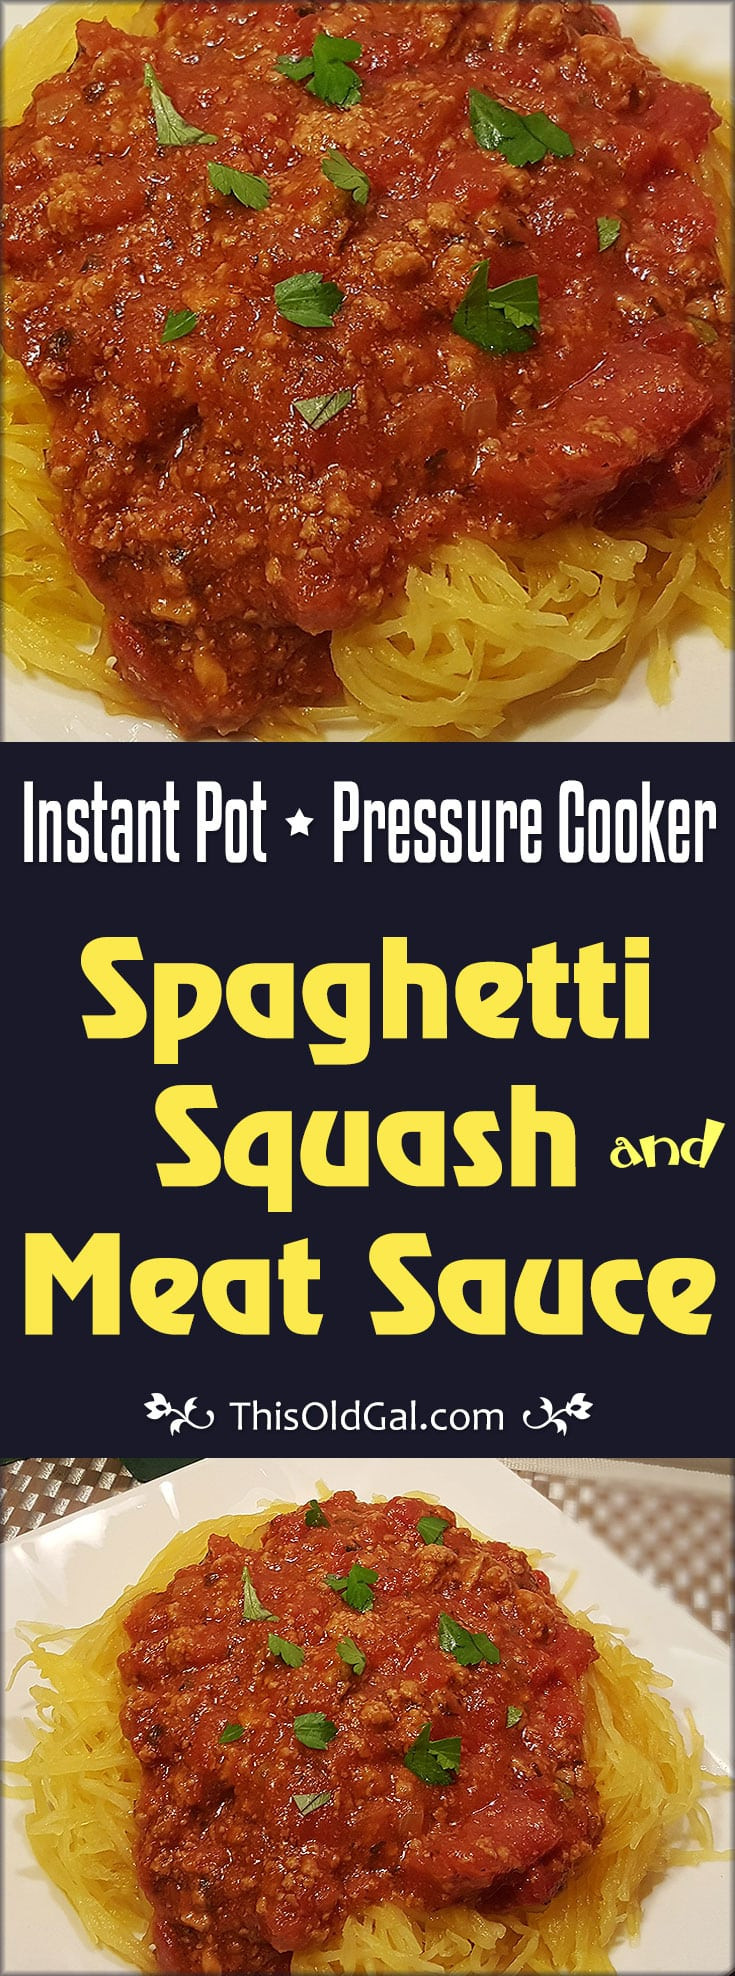 Pressure Cooker Spaghetti And Meat Sauce
 Instant Pot Pressure Cooker Spaghetti Squash and Meat